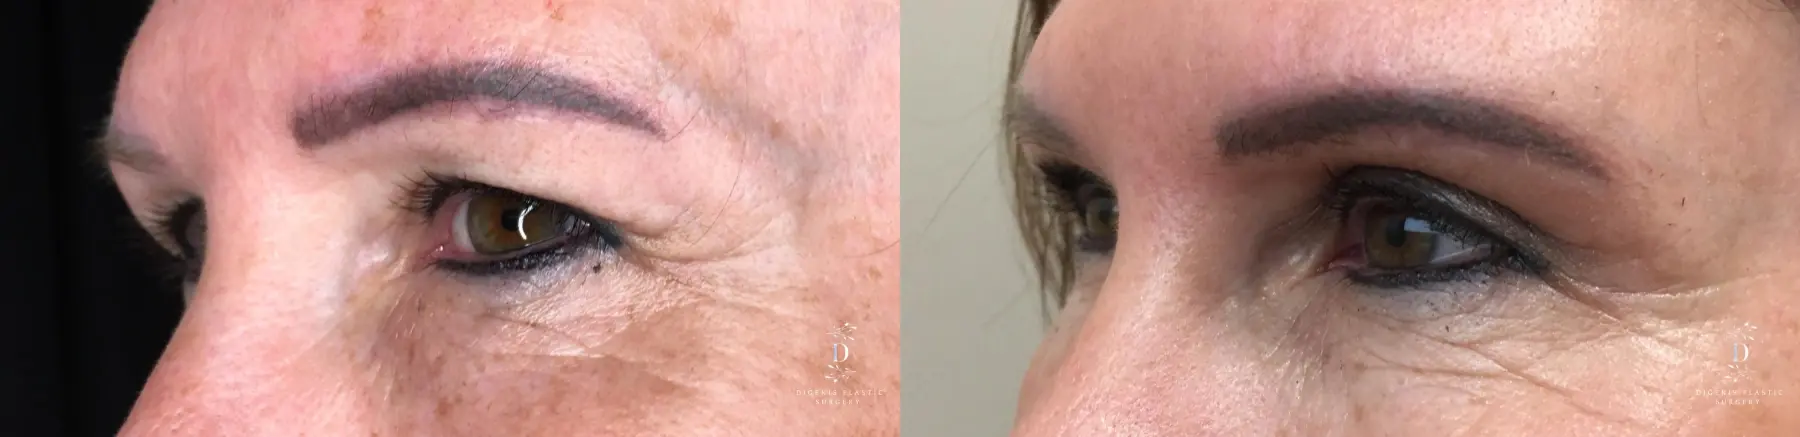 Eyelid Surgery: Patient 28 - Before and After 4